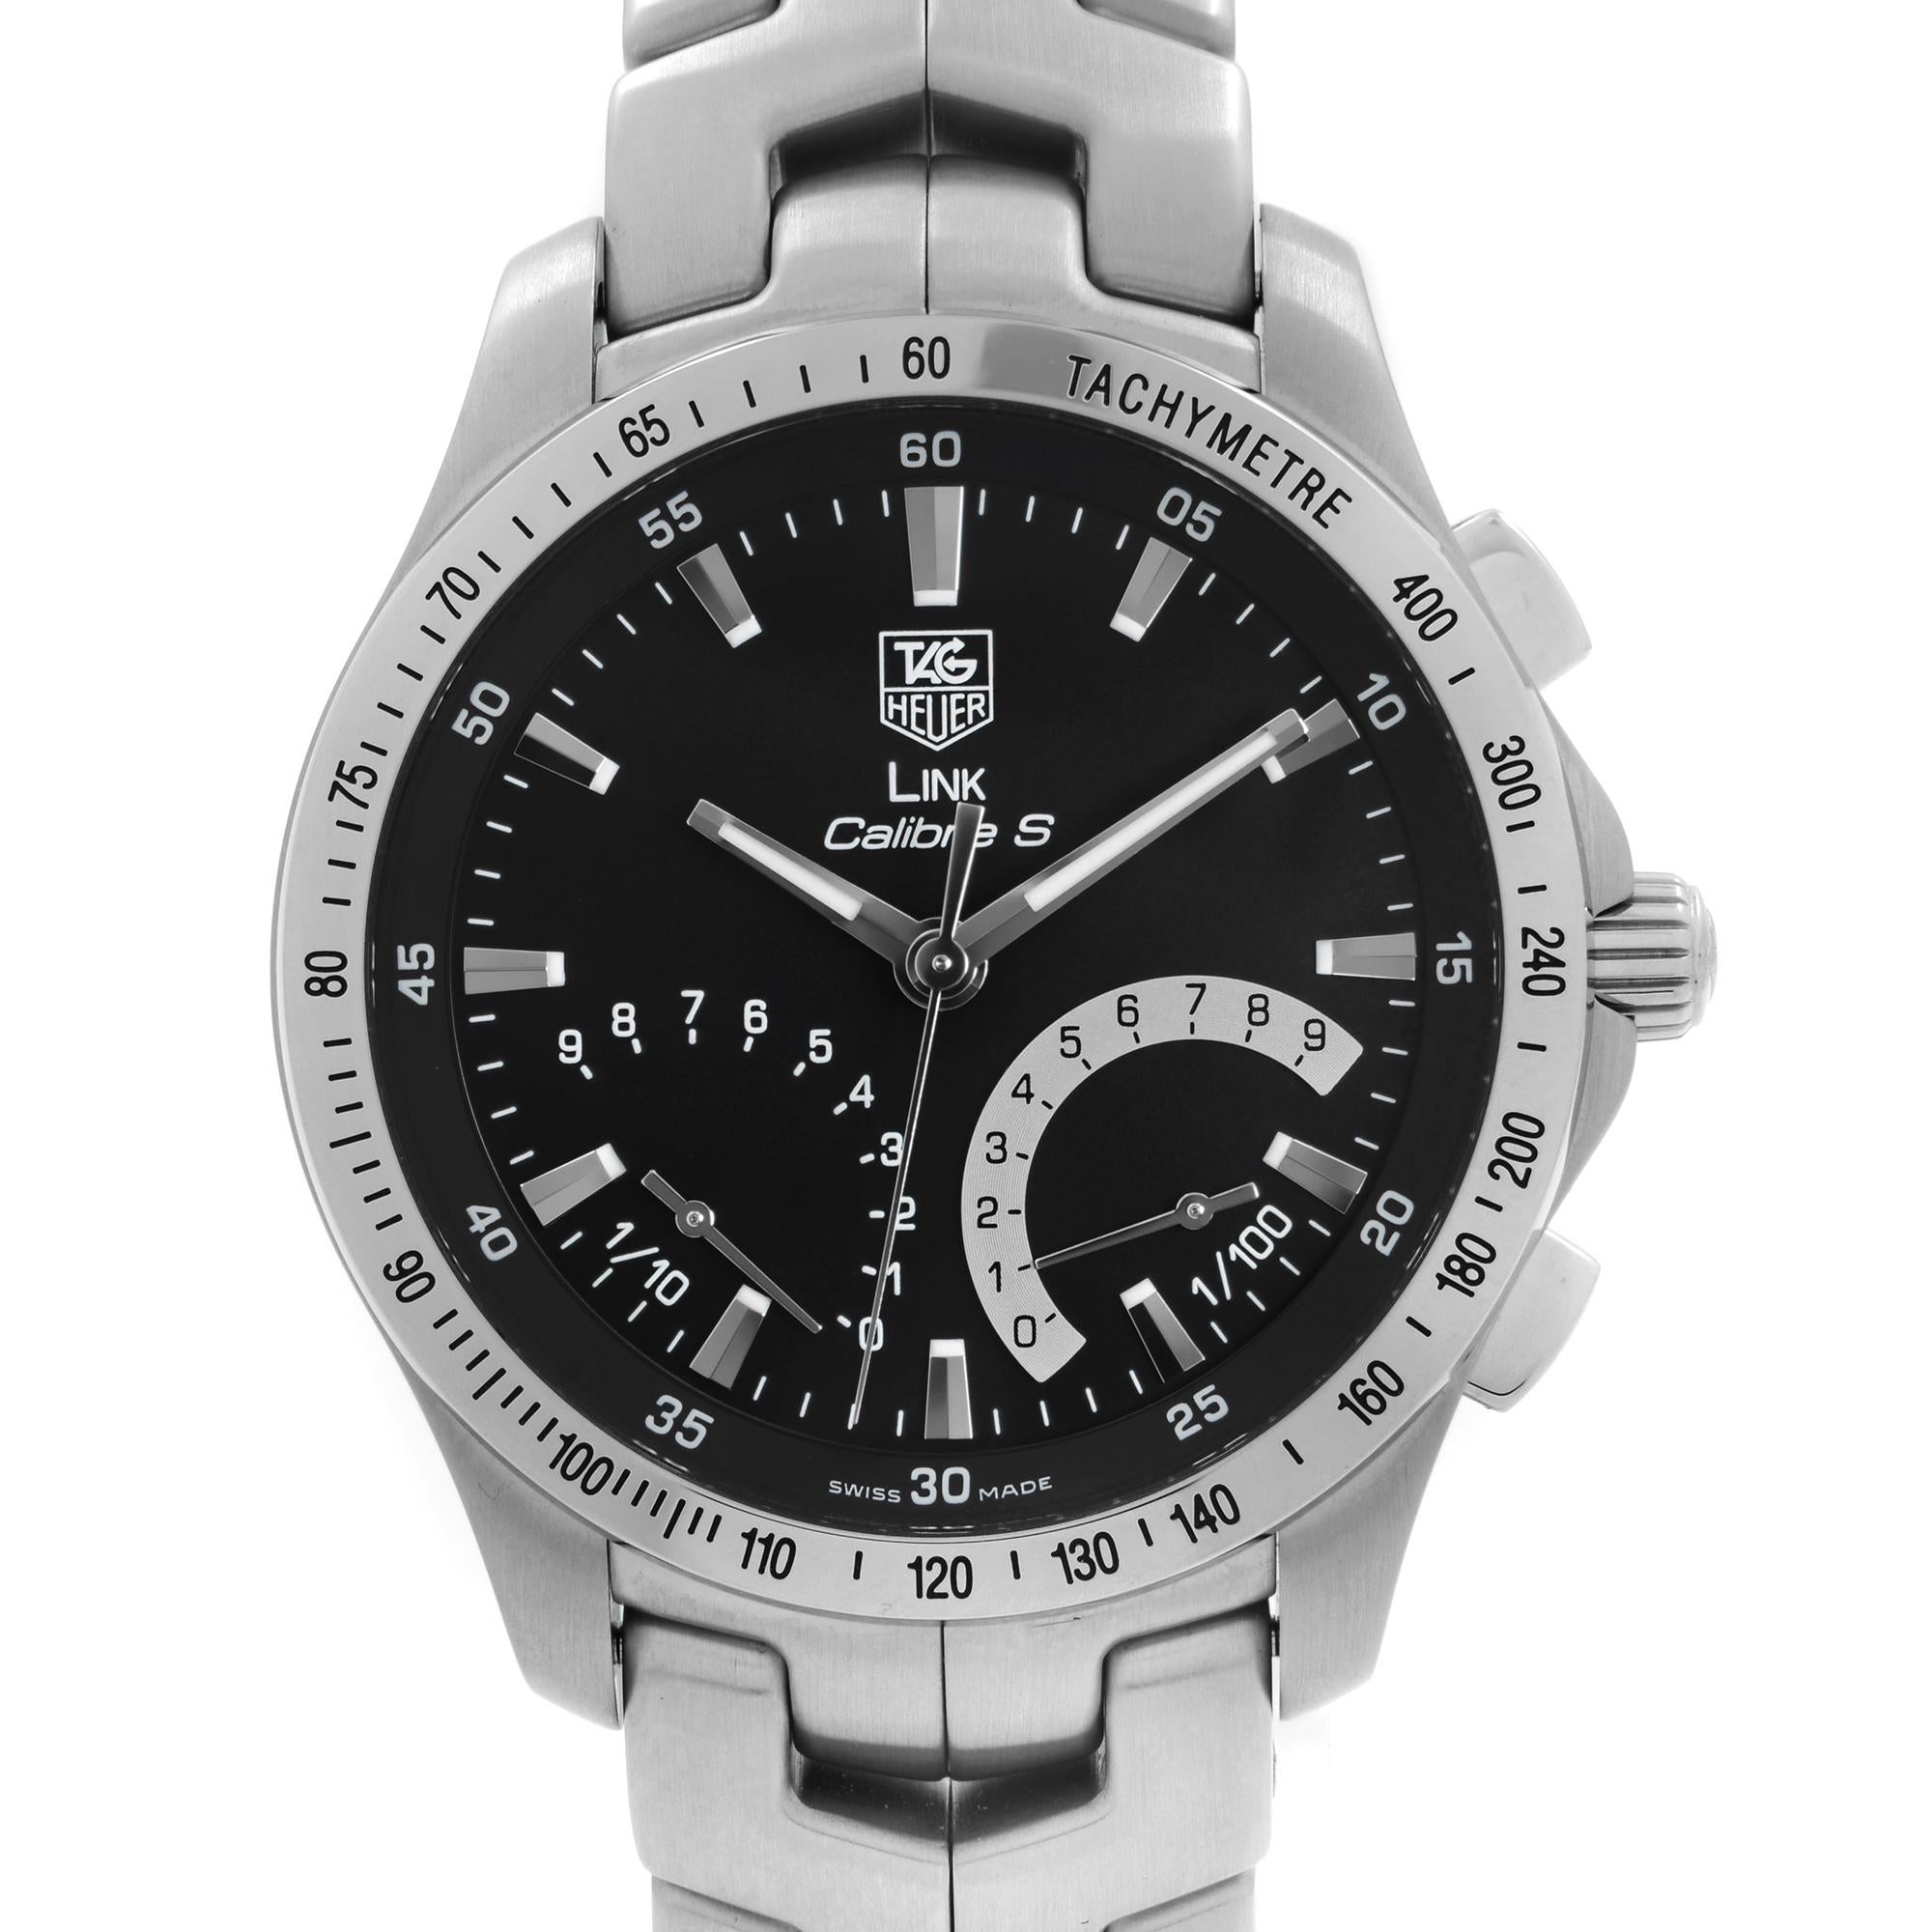 Display Model TAG Heuer Link Calibre S Black Dial Steel Mens Quartz Watch CJF7110.BA0592. This Beautiful Timepiece is Powered by Quartz (Battery) Movement And Features: Round Stainless Steel Case and Bracelet, Fixed Stainless Steel Bezel Showing